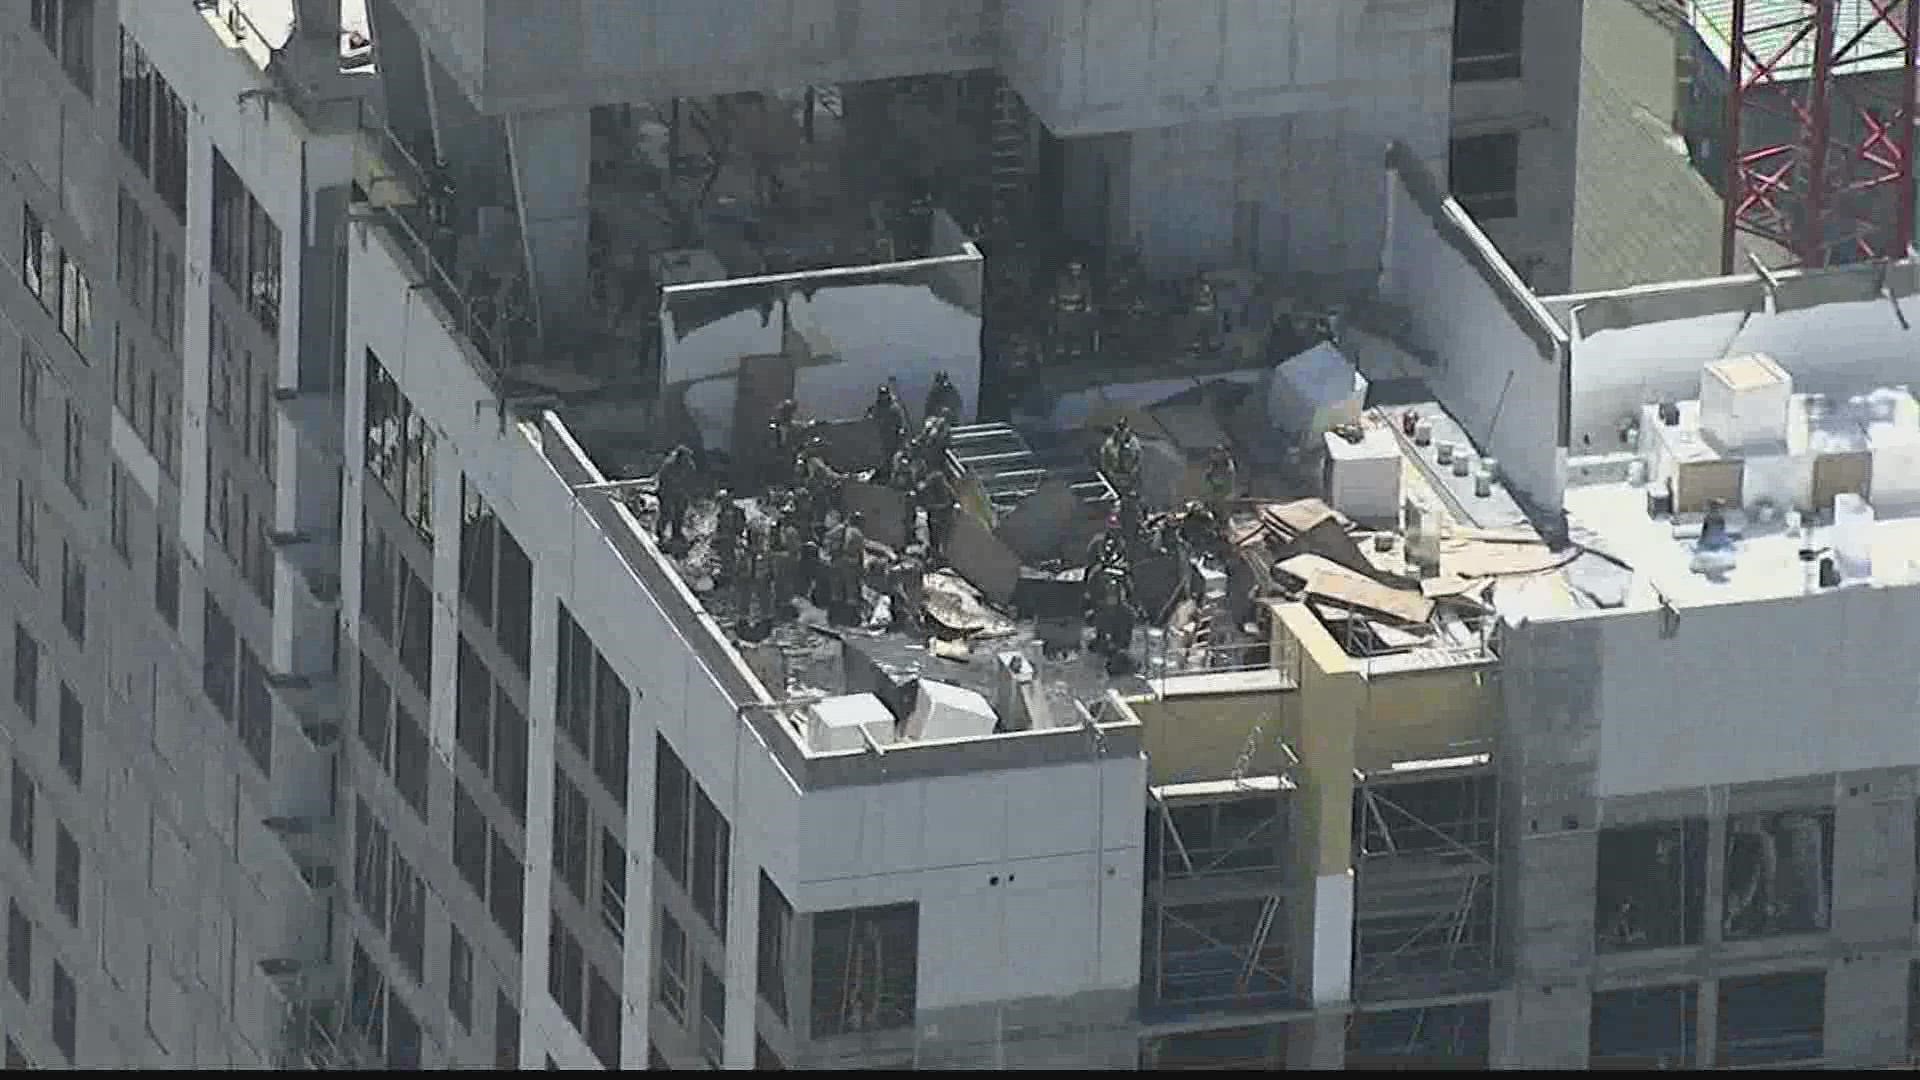 A fire broke out Wednesday afternoon on the roof of a student housing high-rise building under construction in downtown Atlanta, fire officials said.